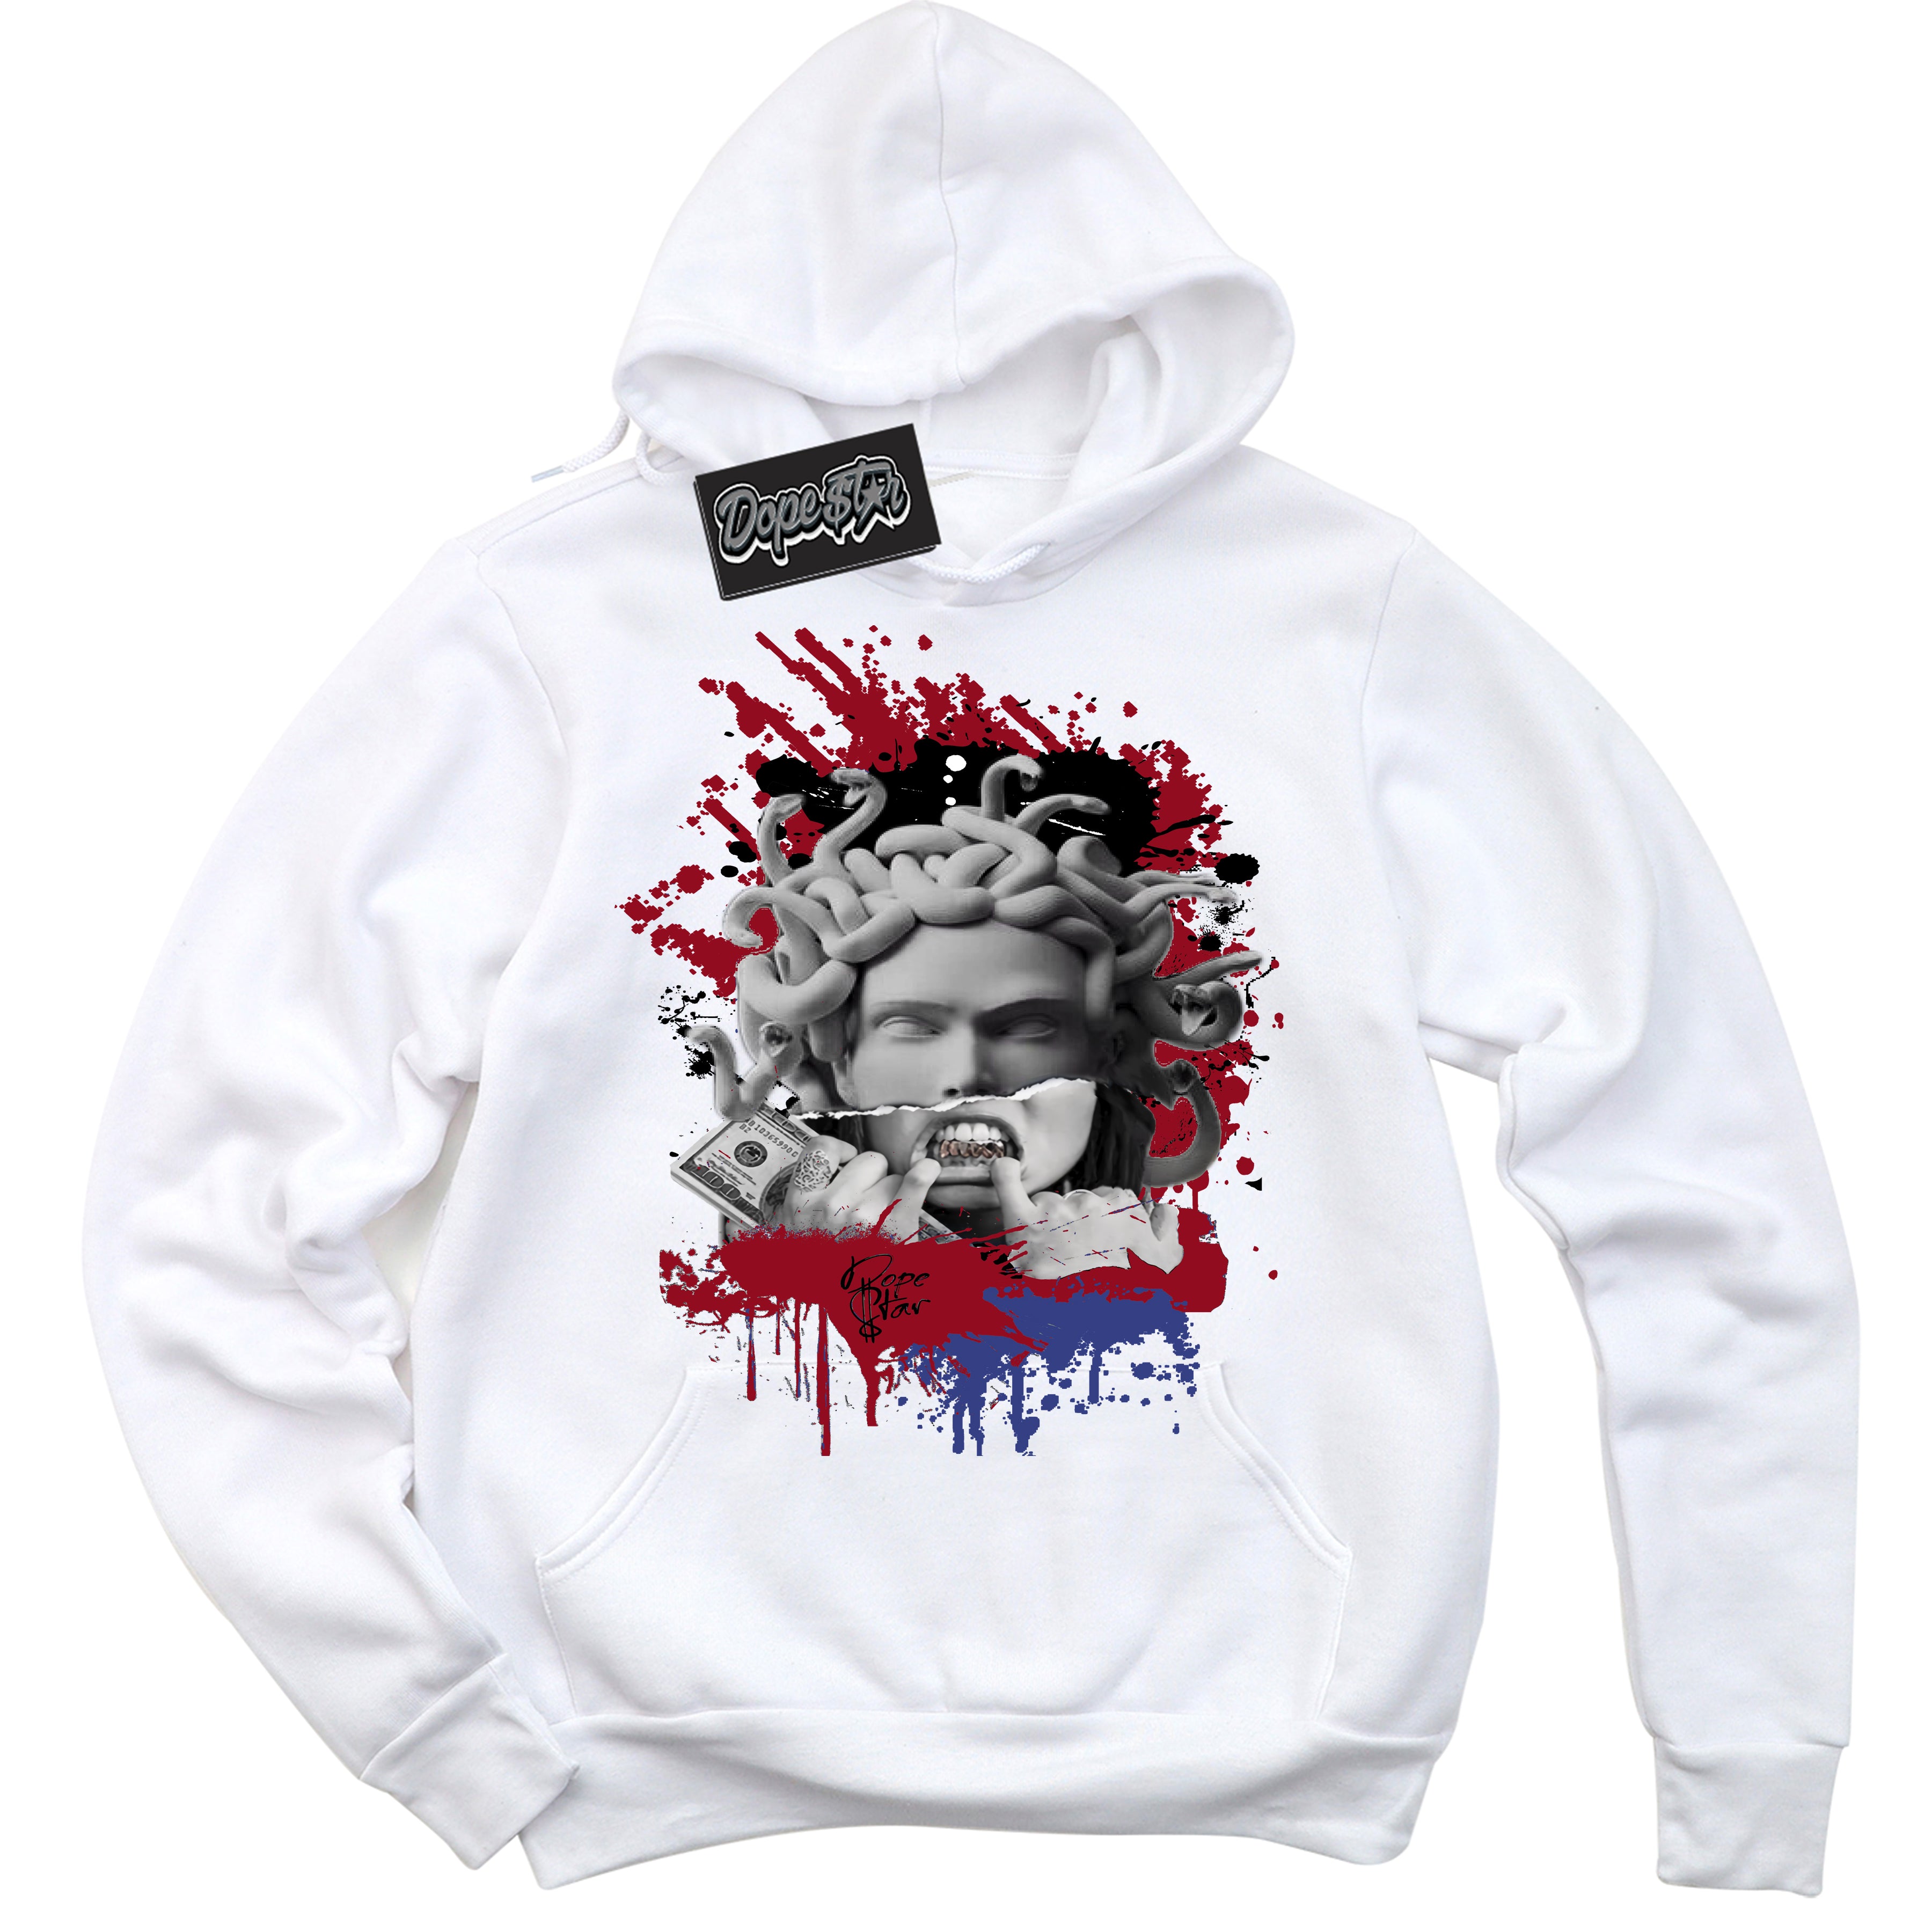 Cool White Hoodie with “ Medusa ”  design that Perfectly Matches Playoffs 8s Sneakers.